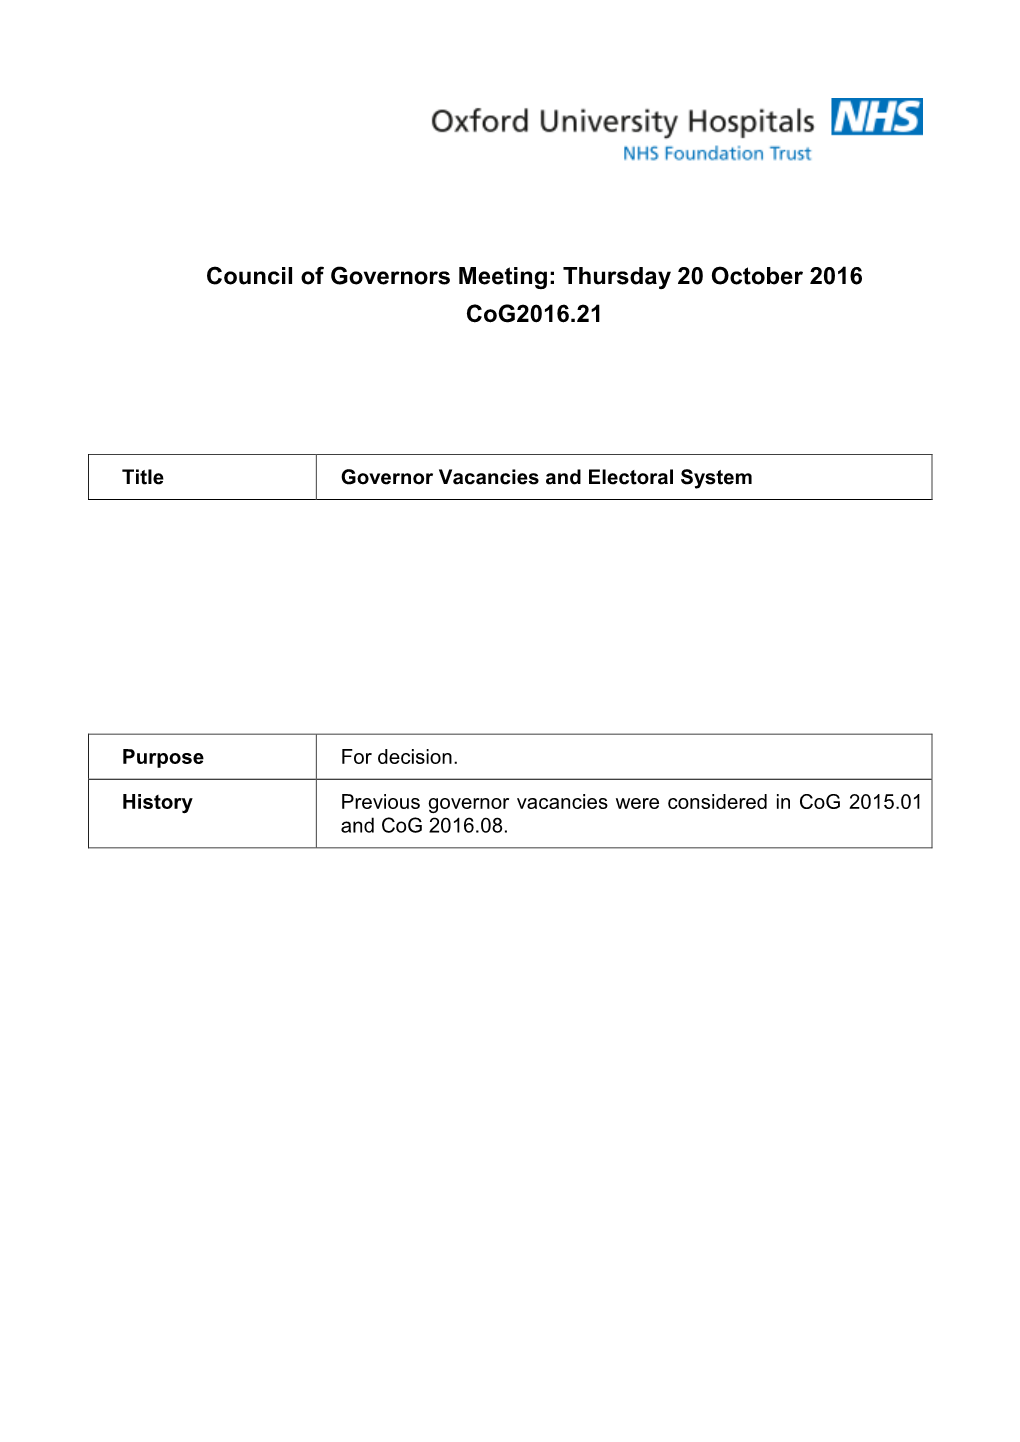 Council of Governors Meeting: Thursday 20 October 2016 Cog2016.21